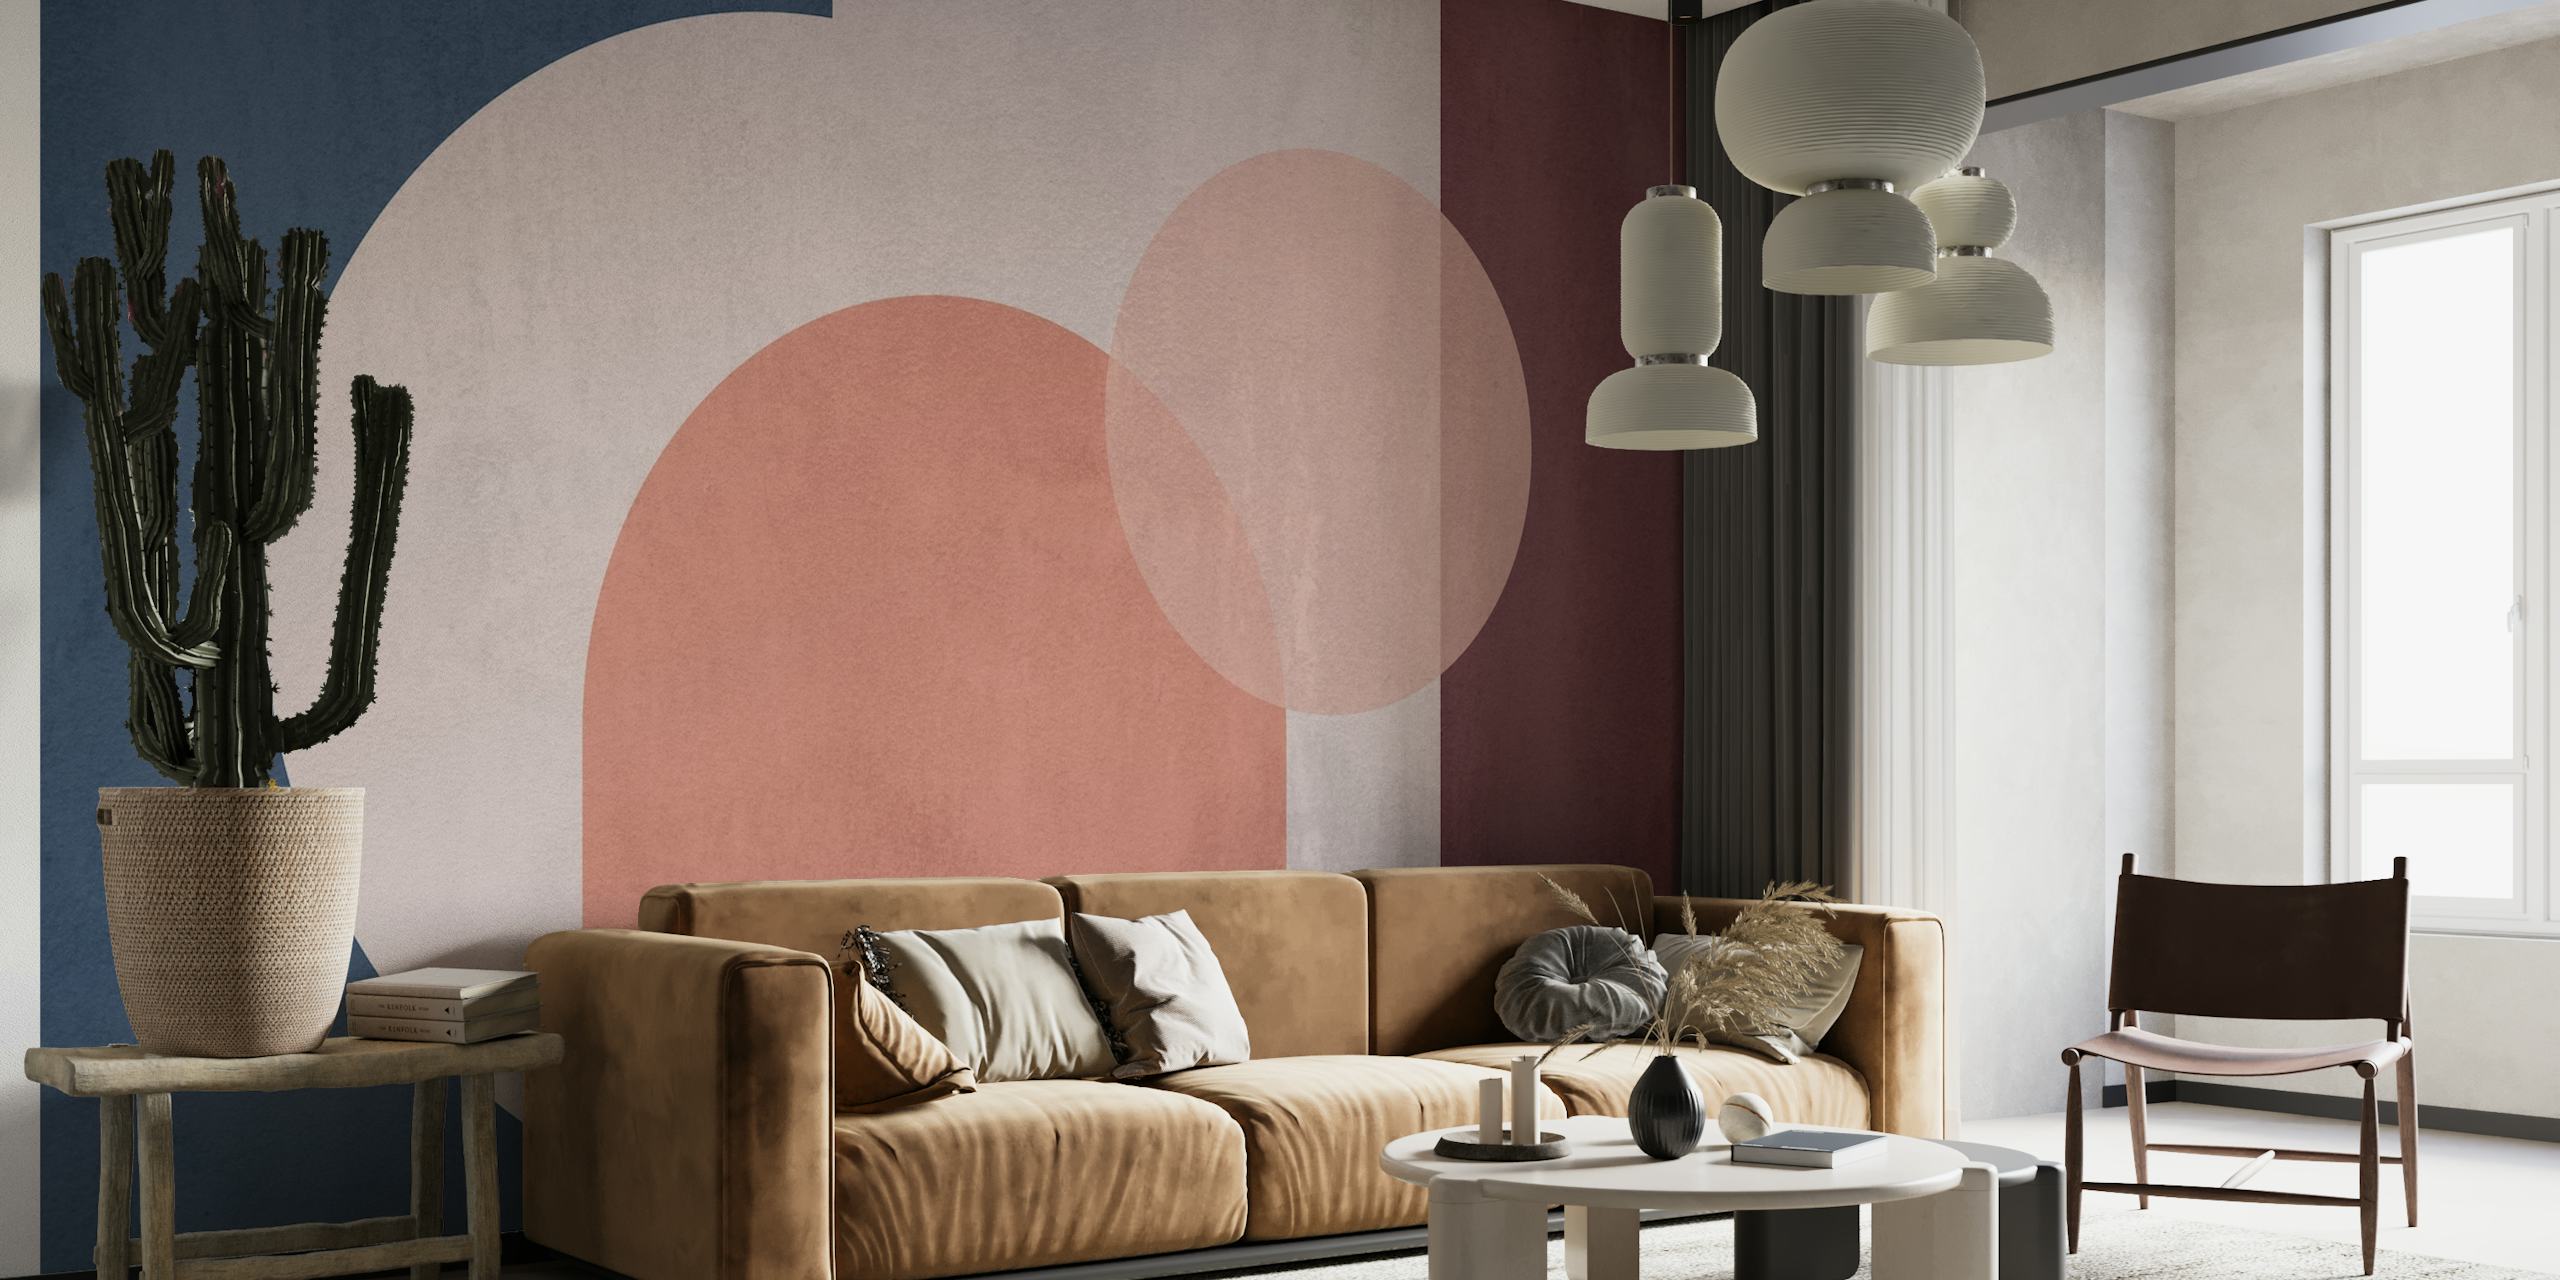 Abstract Soft Cement Geometric Wall Mural in shades of blue, pink, and burgundy